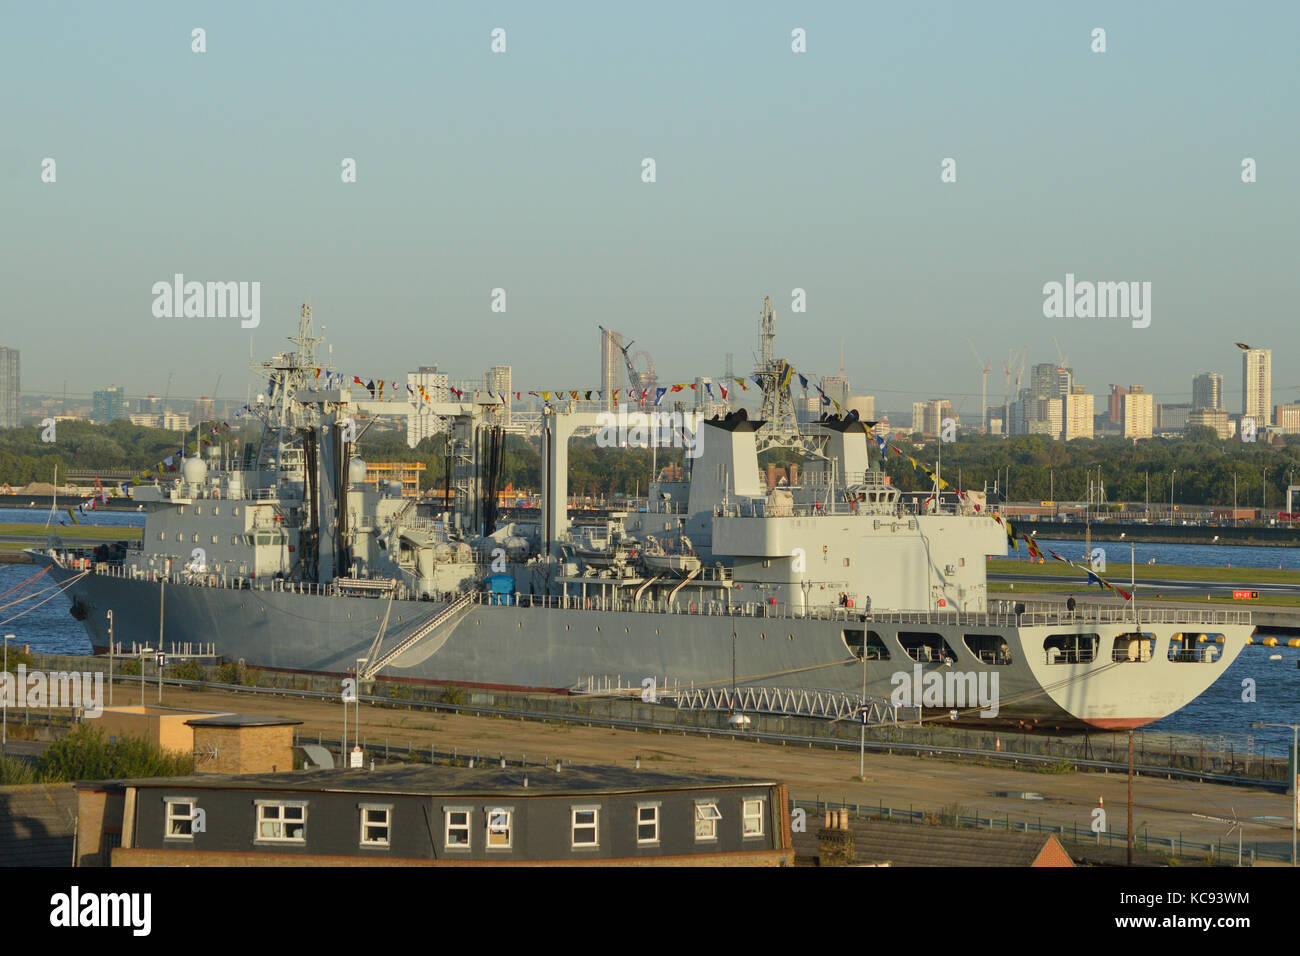 Chinese Navy Replenishment Ship PLAN Gaoyouhu AOR 966 moored in the King George V Dock in London's Royal Docks during a port call Stock Photo